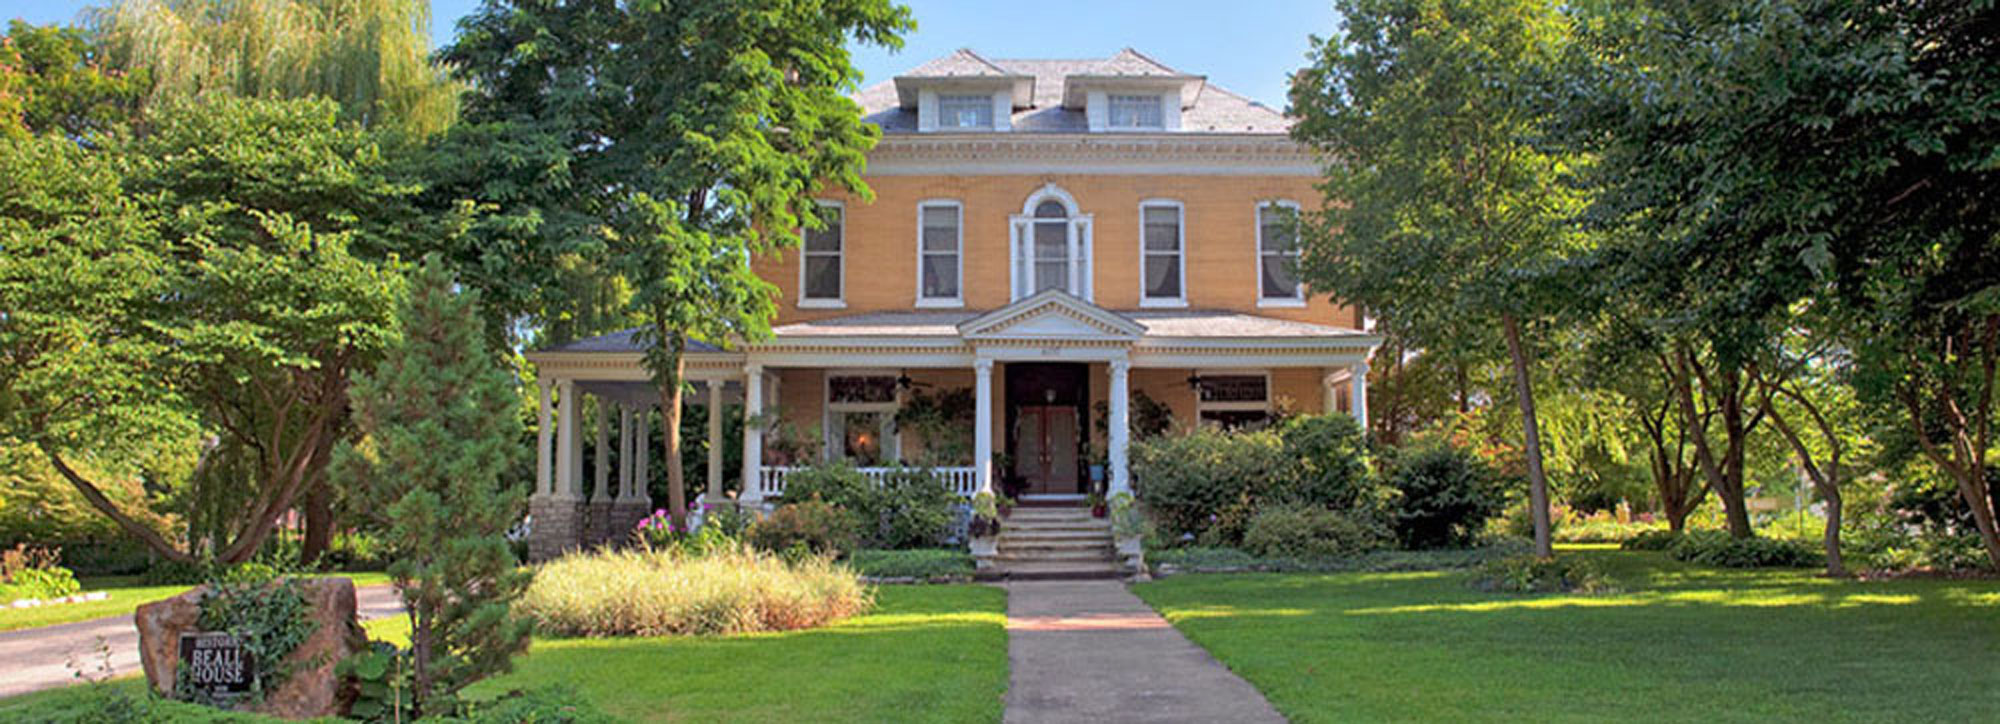 Beall Mansion Bed and Breakfast Inn St. Louis Area